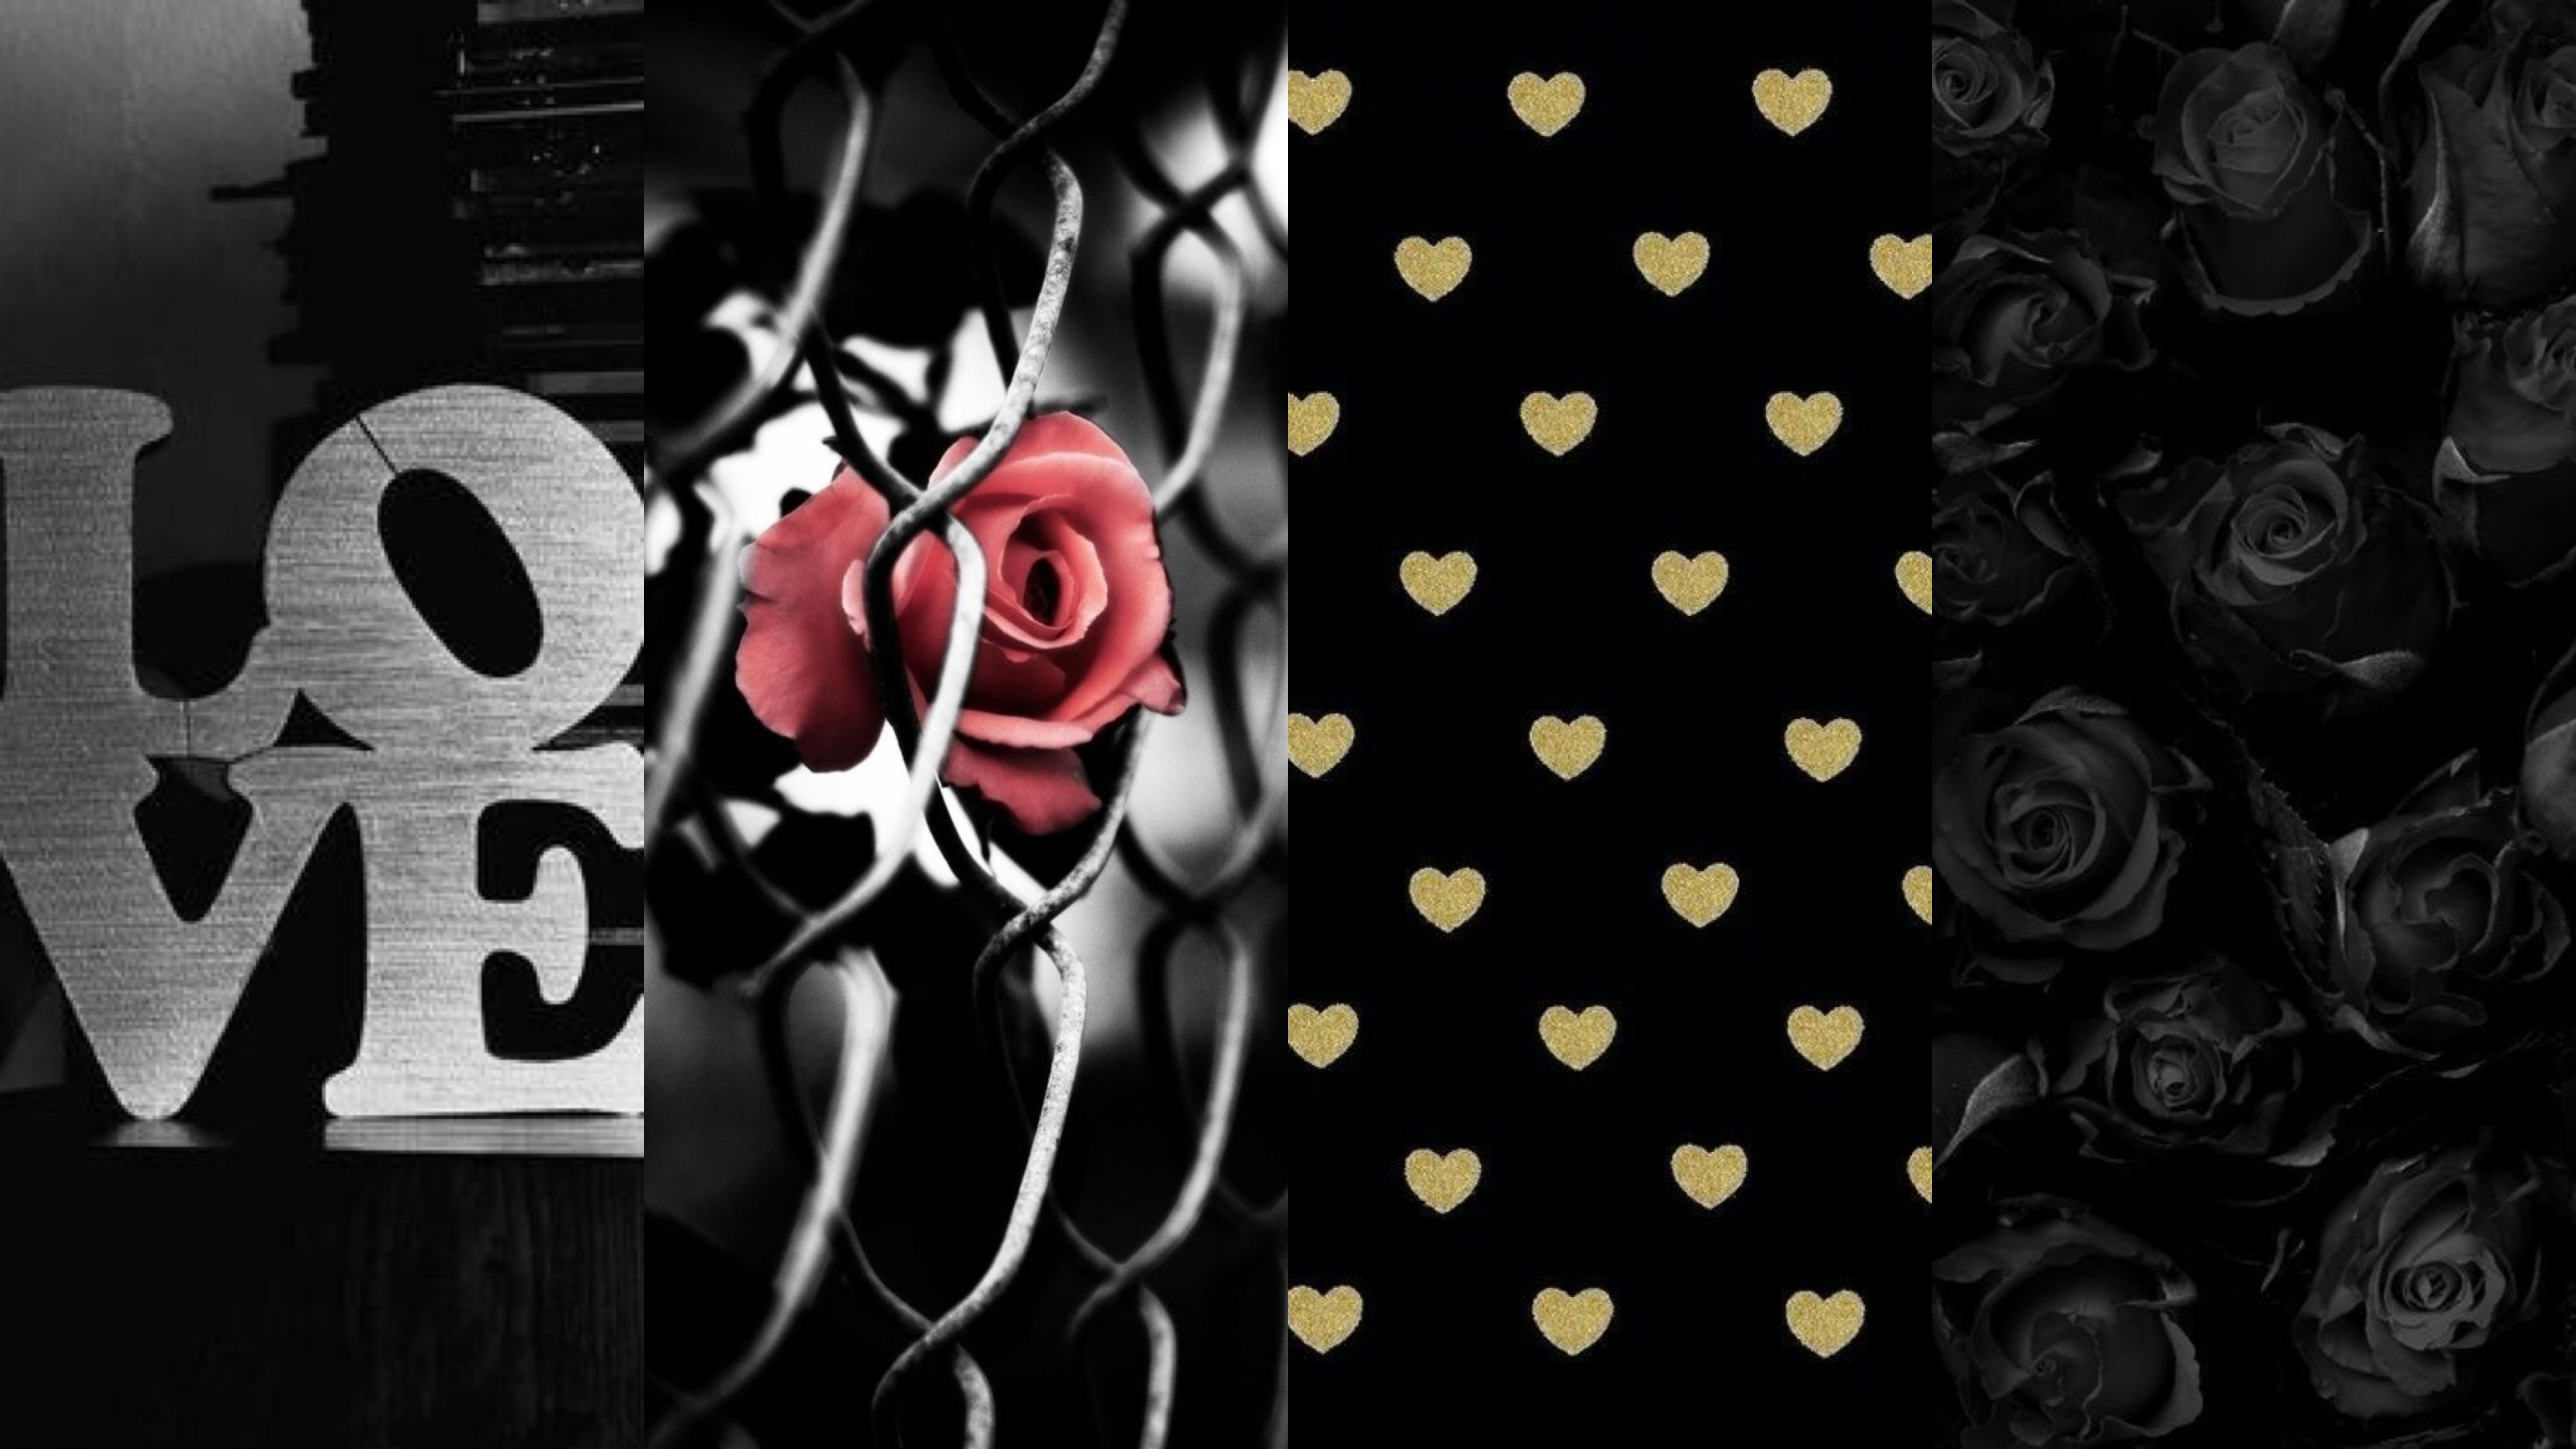 3200x1800 Heart Raindrop | Painted Hearts | Black/Red Roses | Pink Hearts